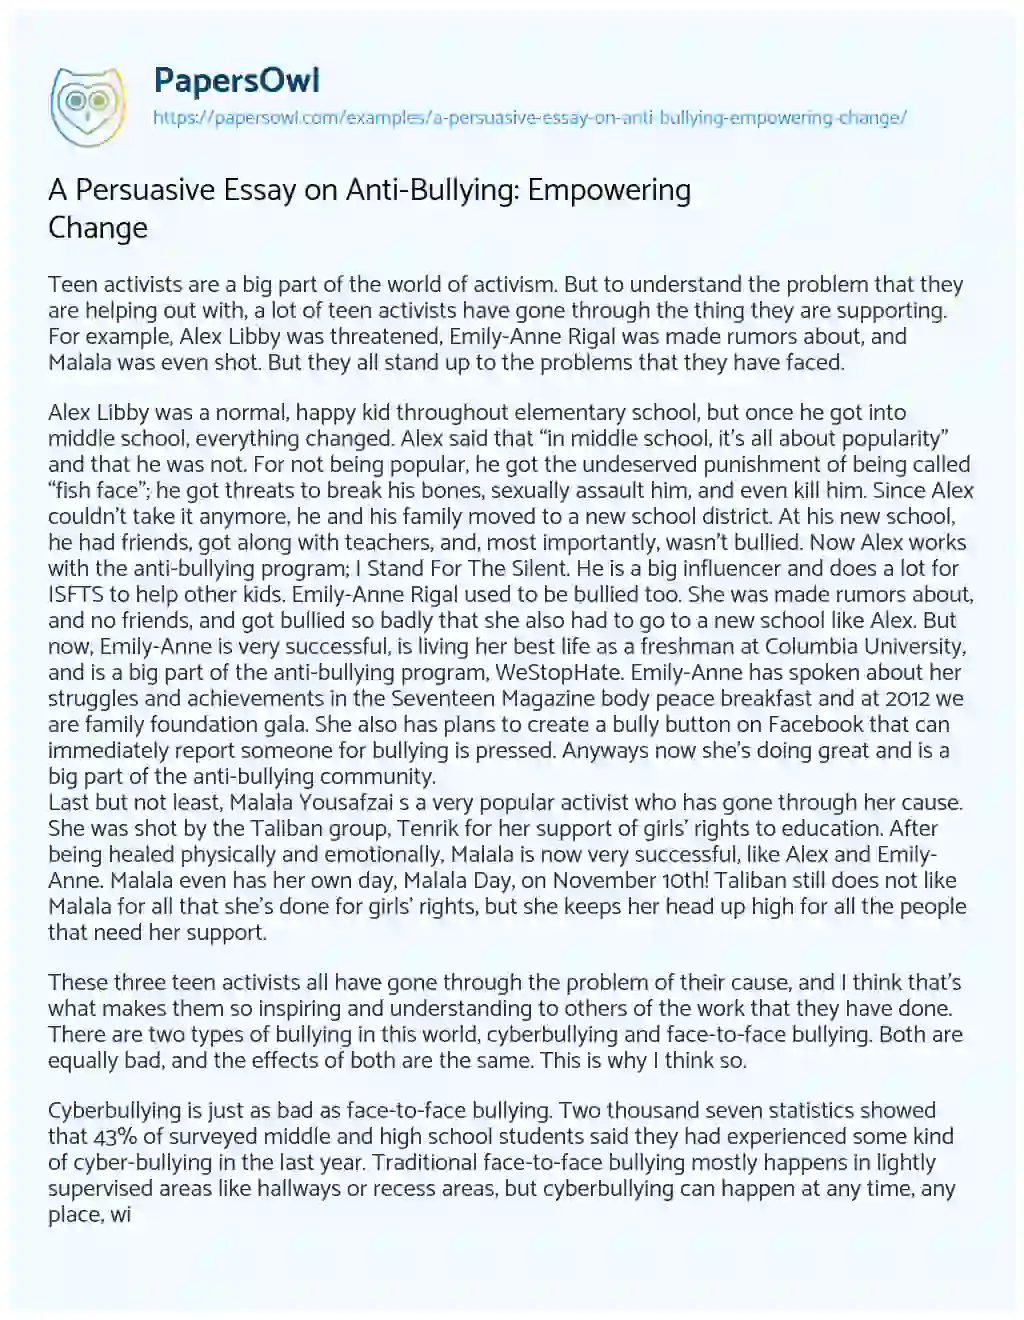 Essay on A Persuasive Essay on Anti-Bullying: Empowering Change